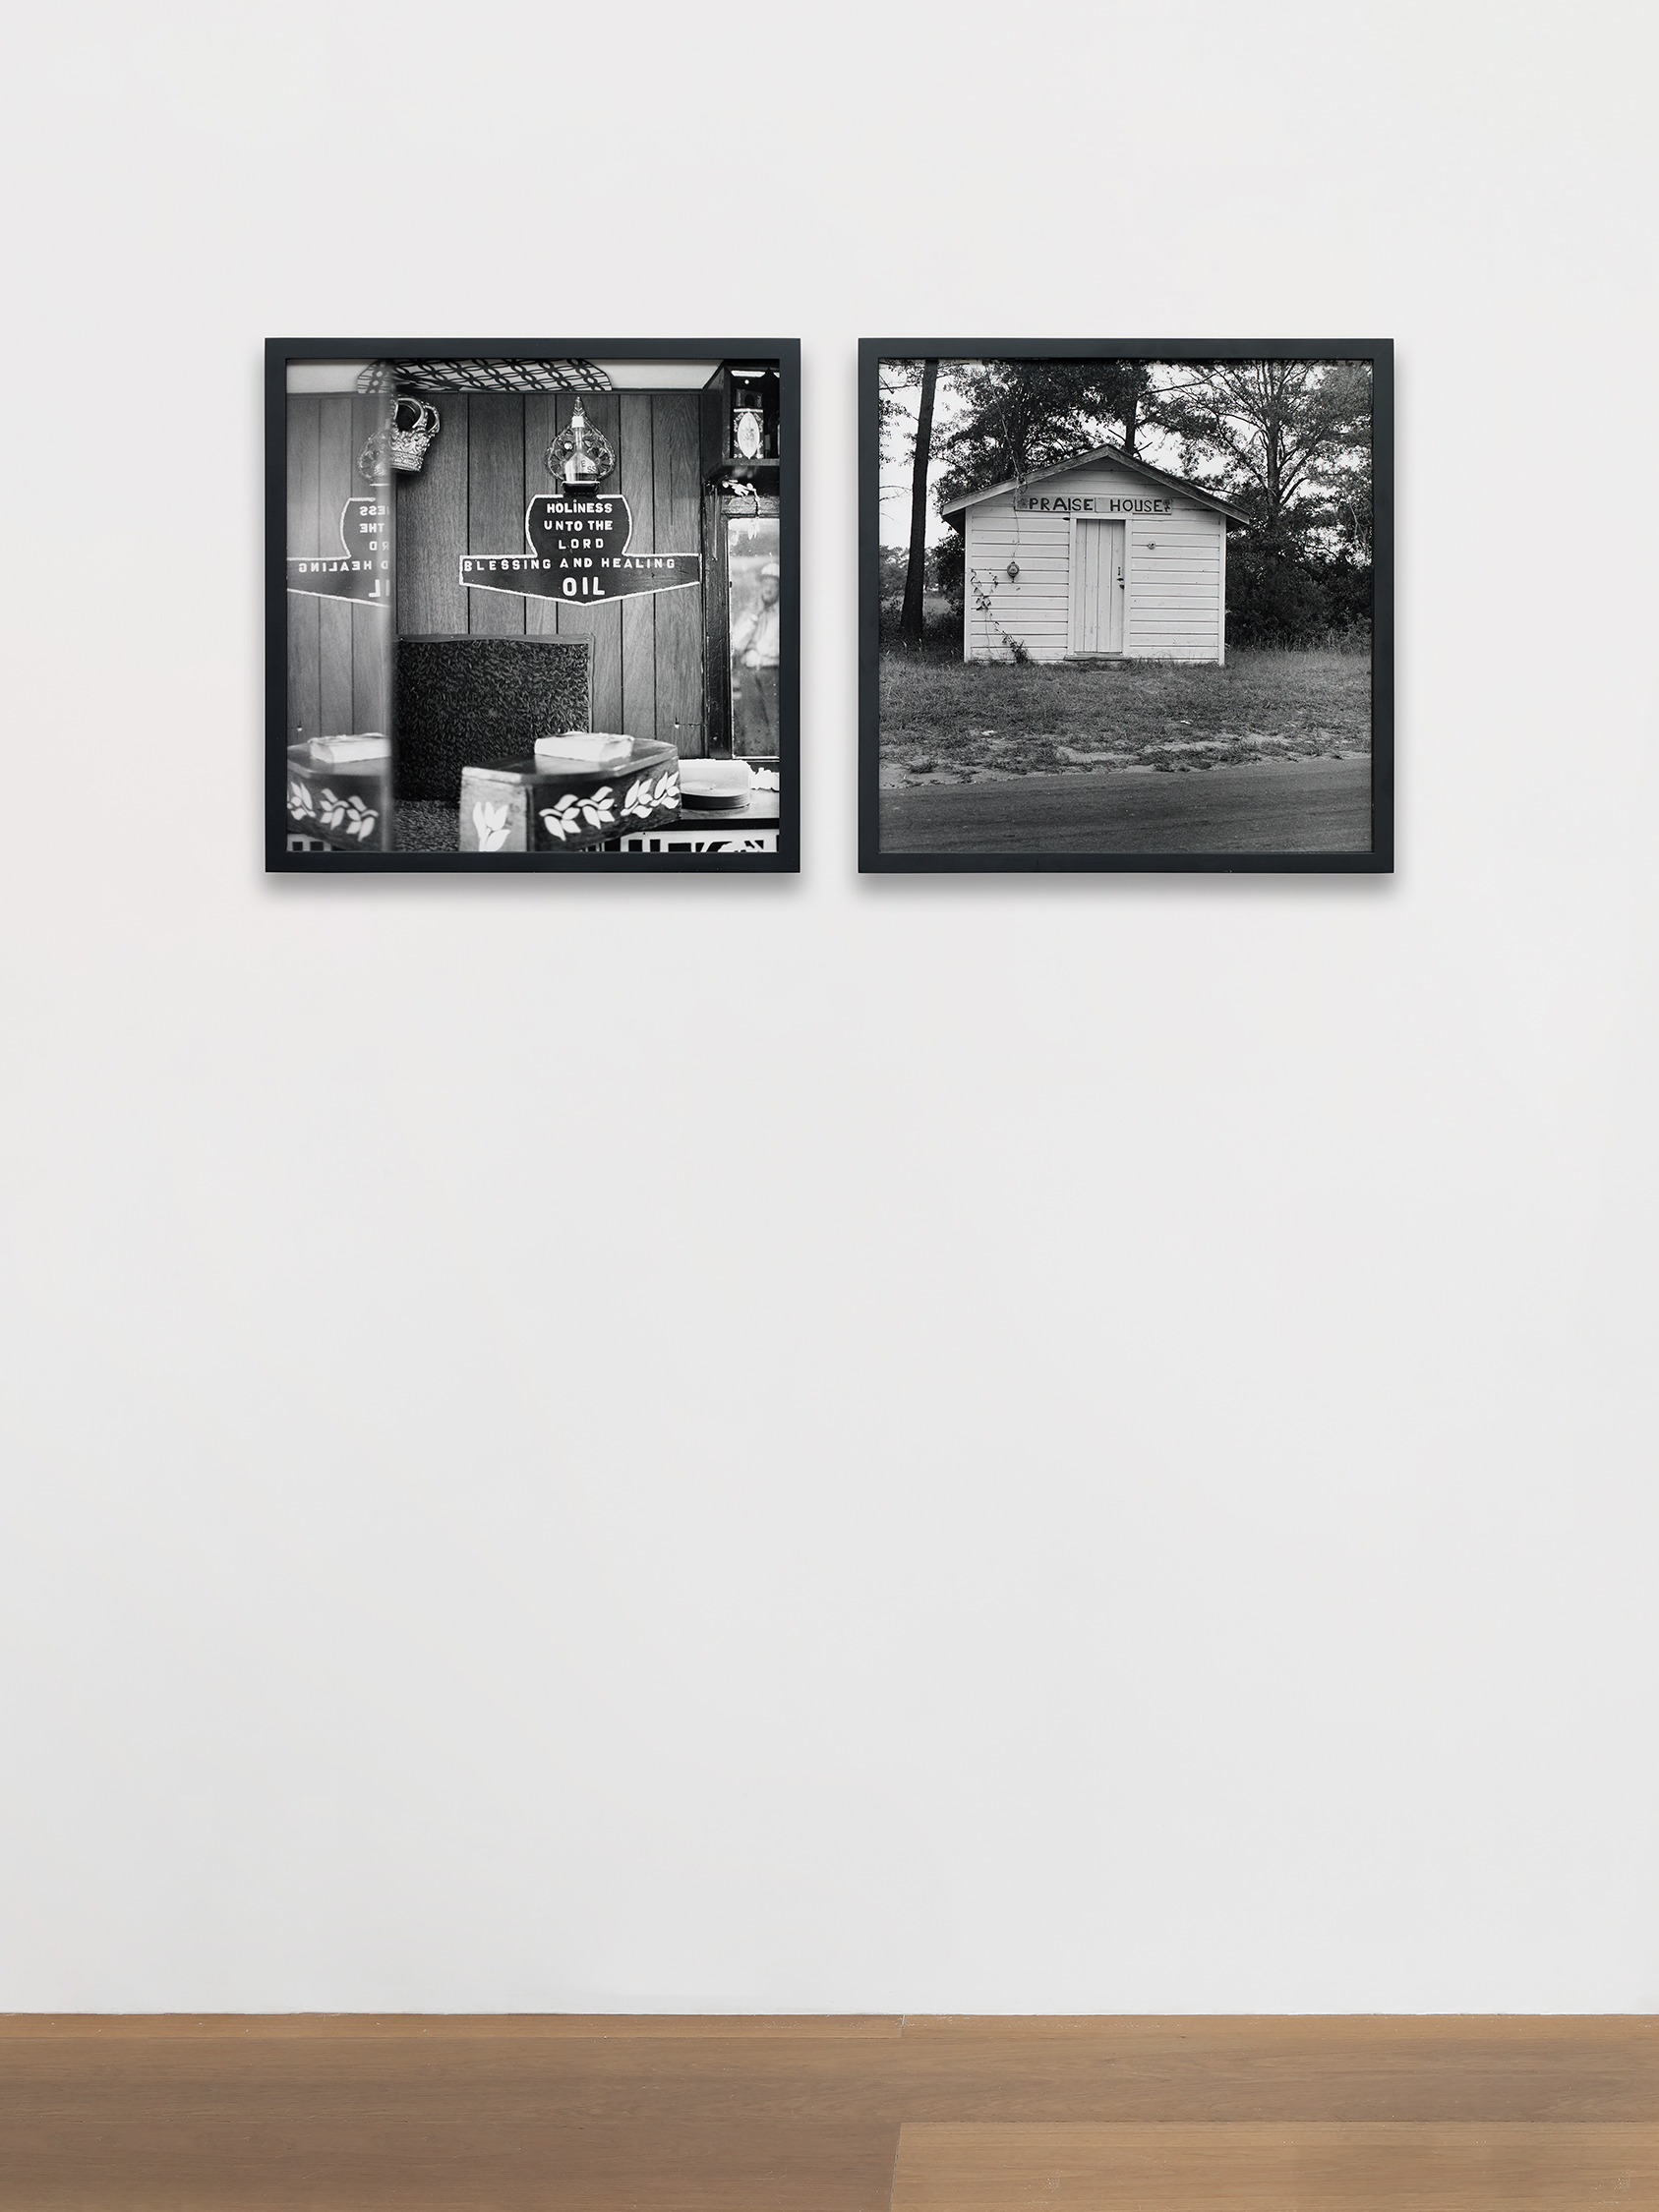 Image of Carrie Mae Weems' work Untitled Praise House Blessing and Healing Oil, 1992-1993